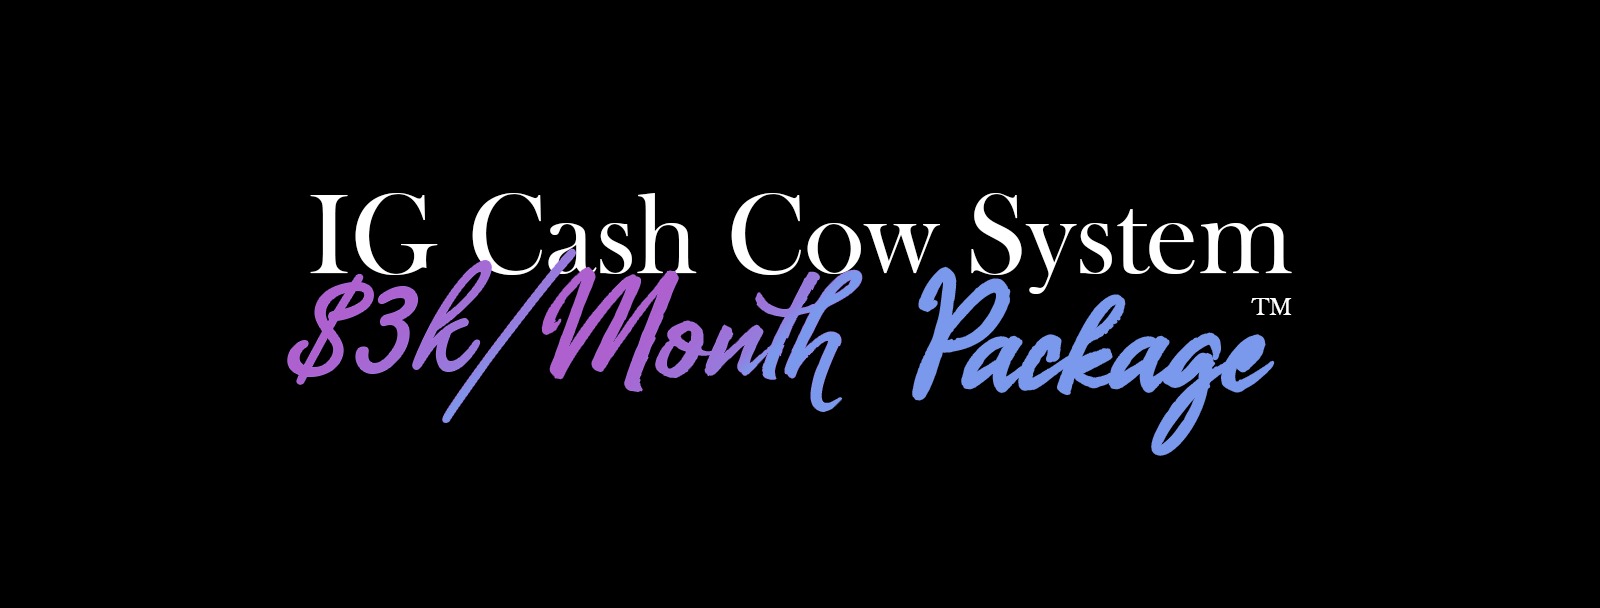 IG Cash Cow System - $3k/month Package